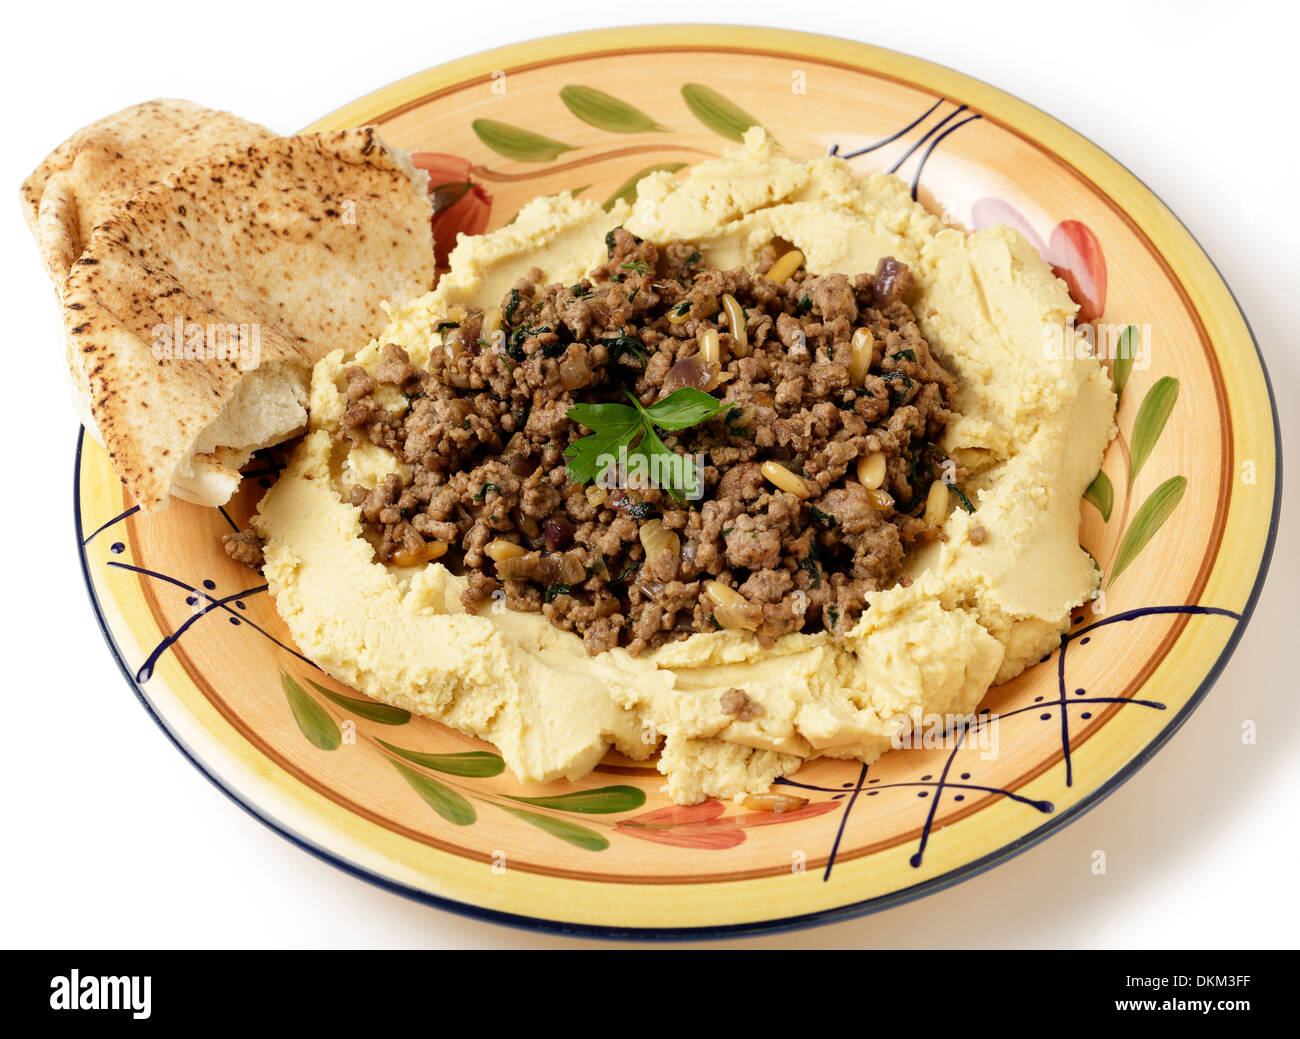 A plate of hummus chickpea dip filled with fried lamb mince, onion, pine nuts and parsley, known as hummus bil lahme. Stock Photo